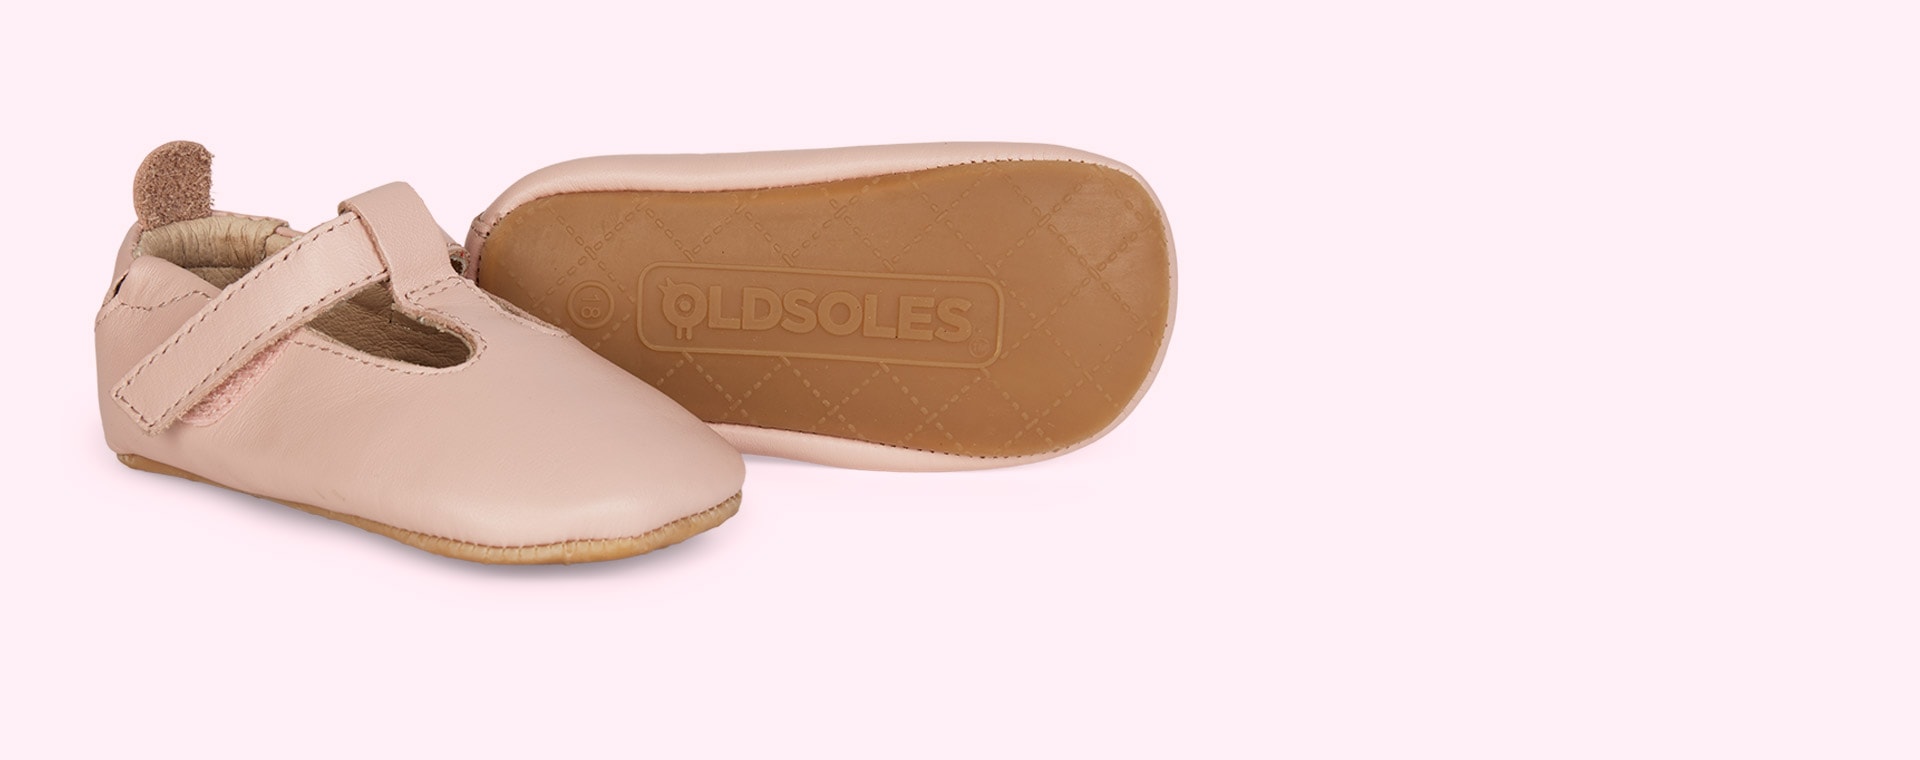 Old Soles Shoes Size Chart